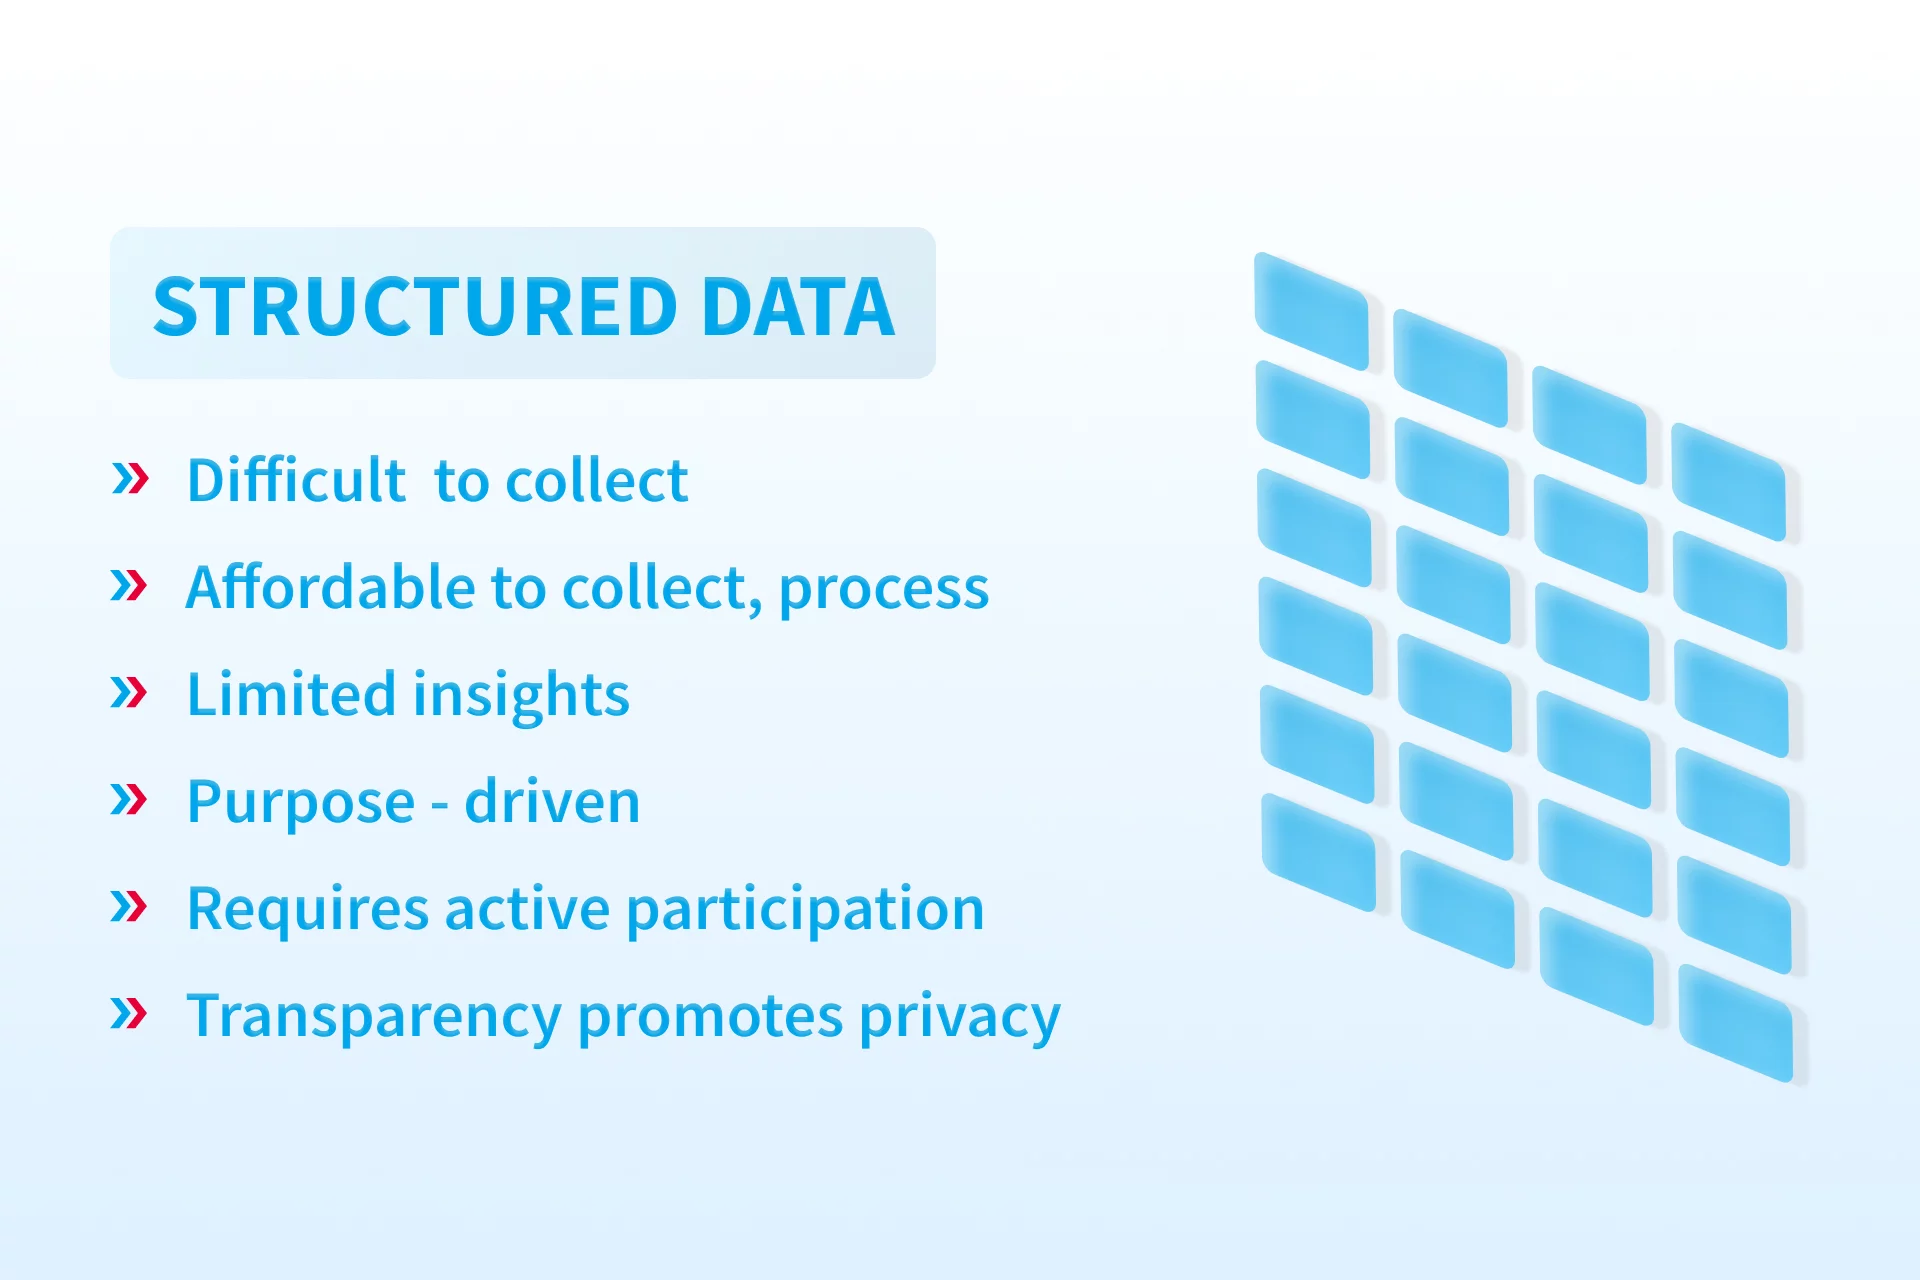 unstructured data case study examples